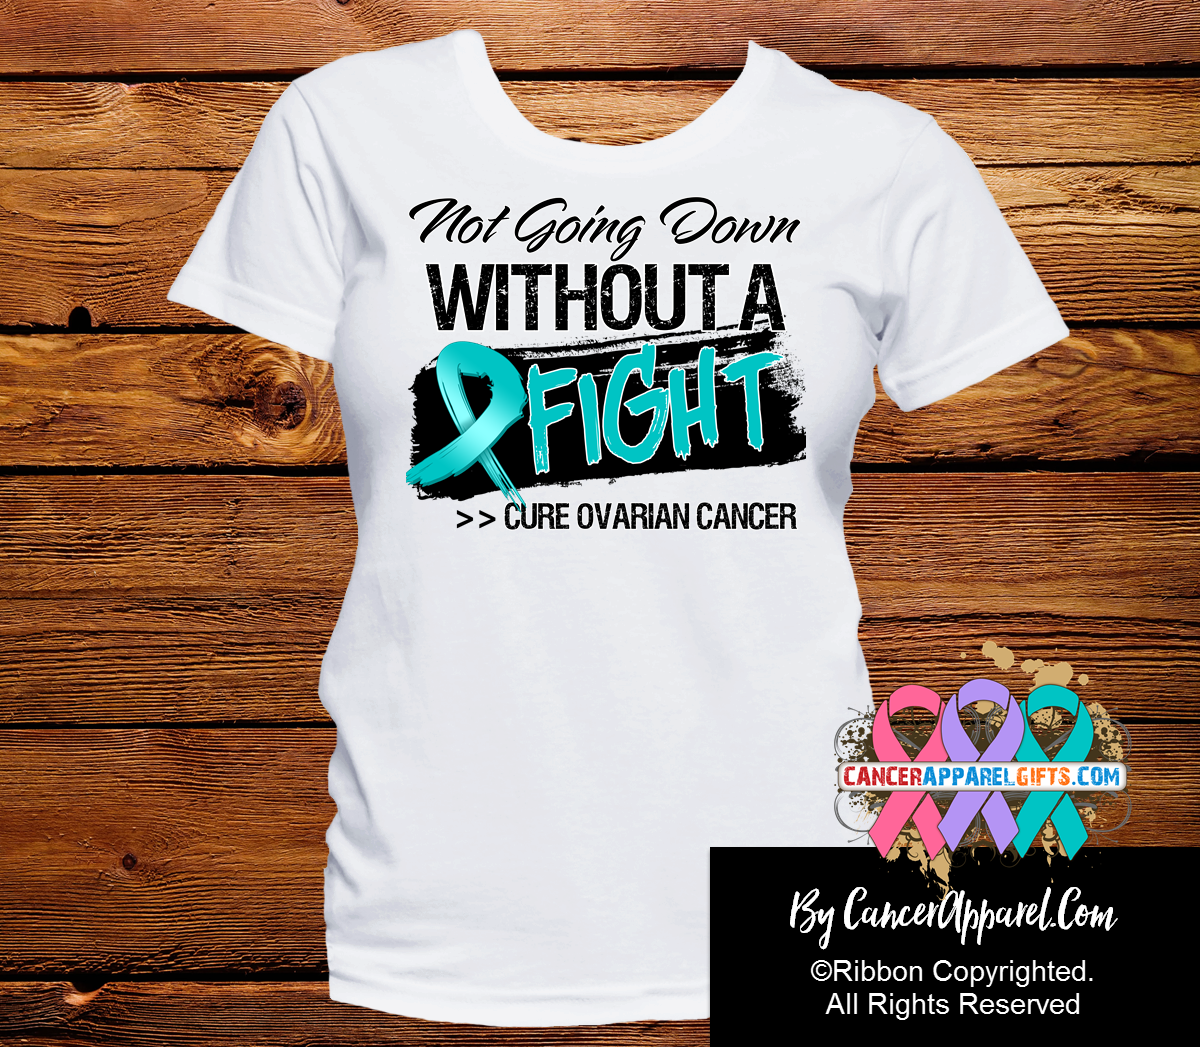 Ovarian Cancer Not Going Down Without a Fight Shirts - Cancer Apparel and Gifts